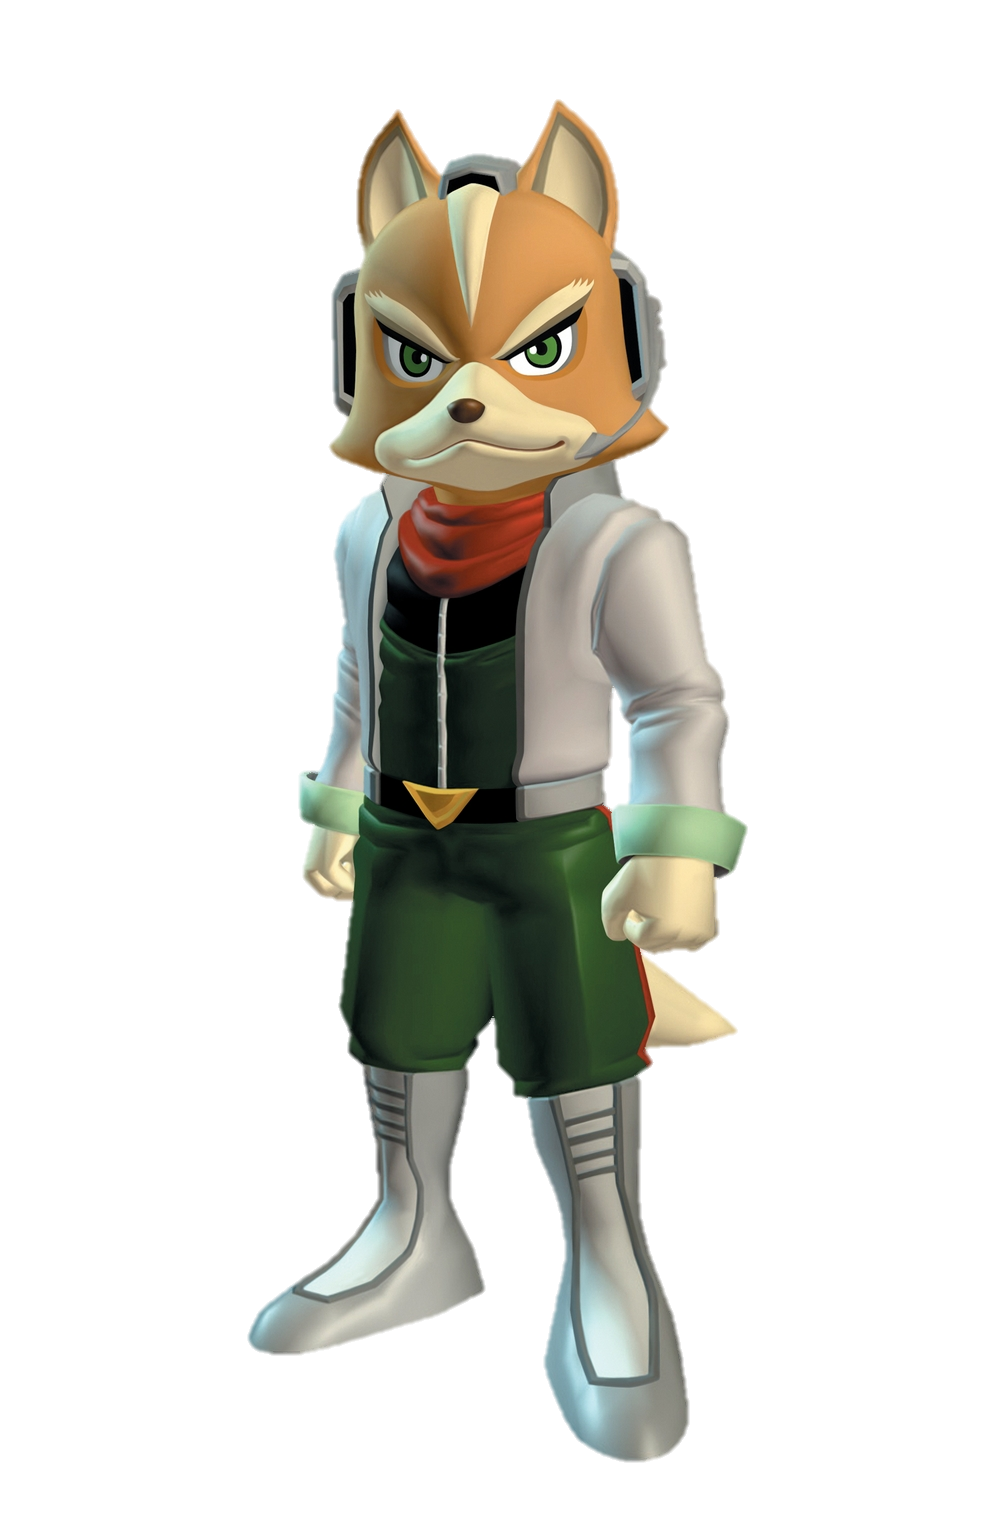 Download PNG image - Star Fox Png Pic 326, Star Fox PNG - Free PNG